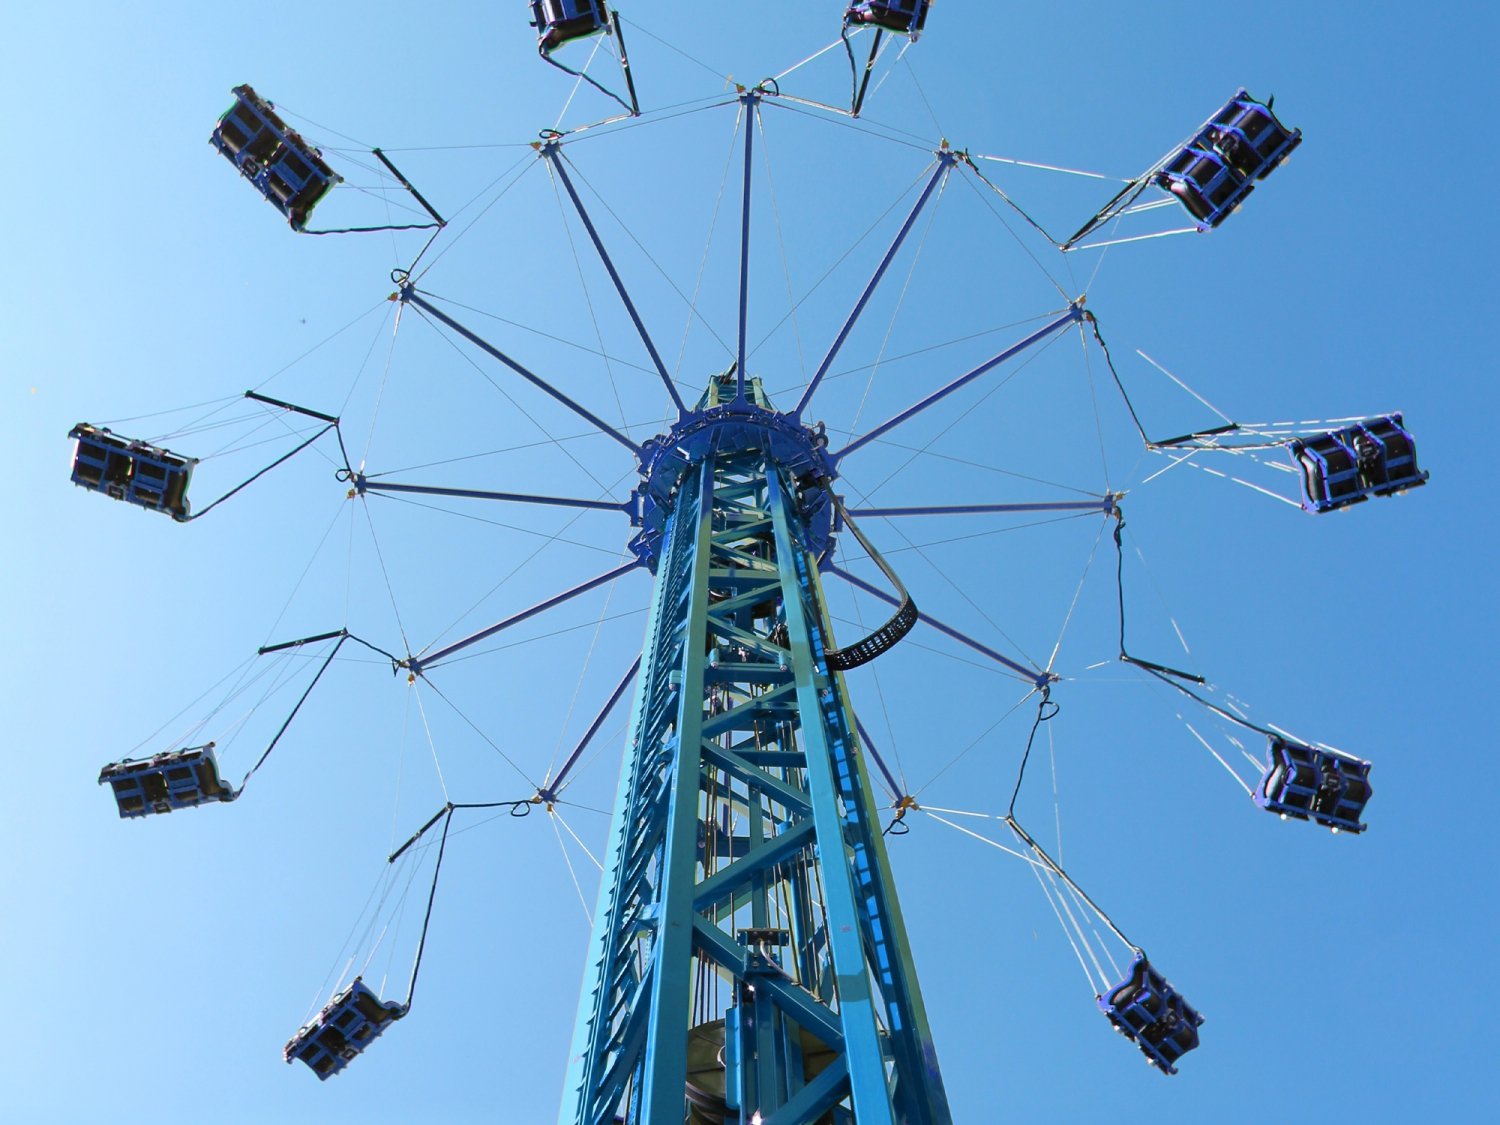 New sights and heights for the Summer at Luna Park